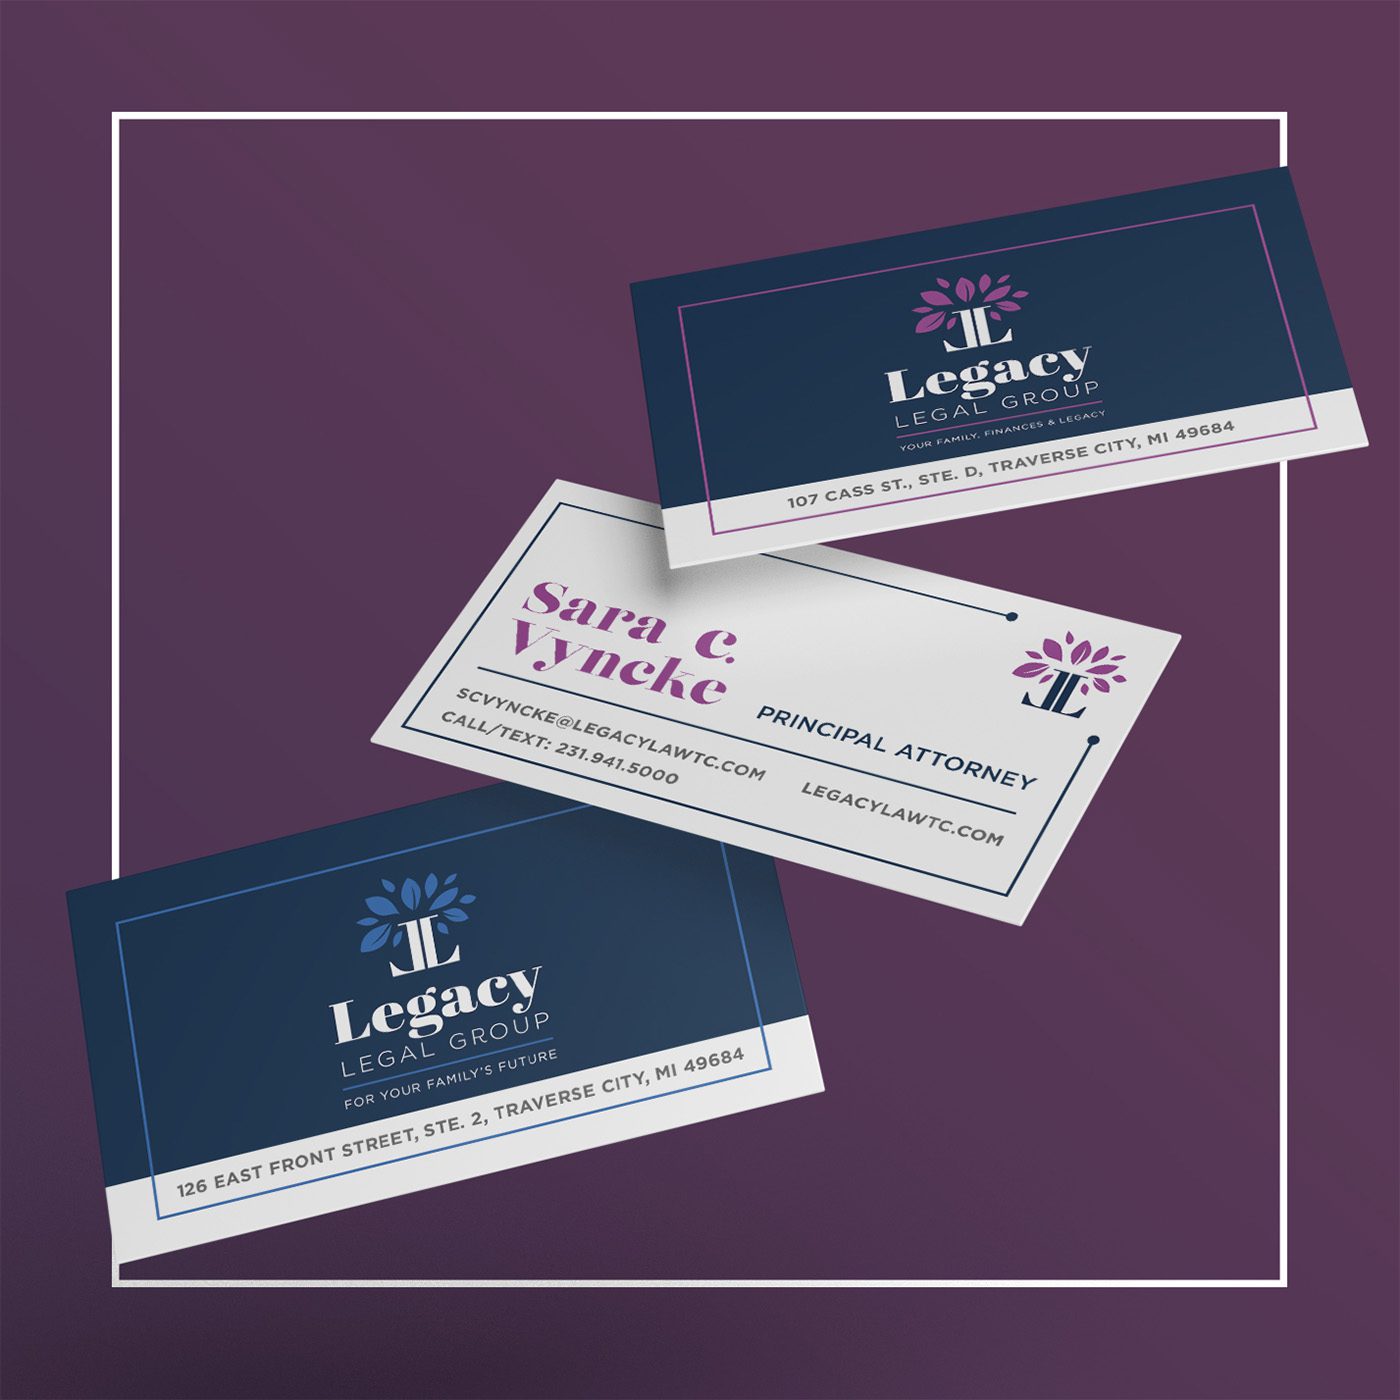 Legacy legal Group Business Card Design